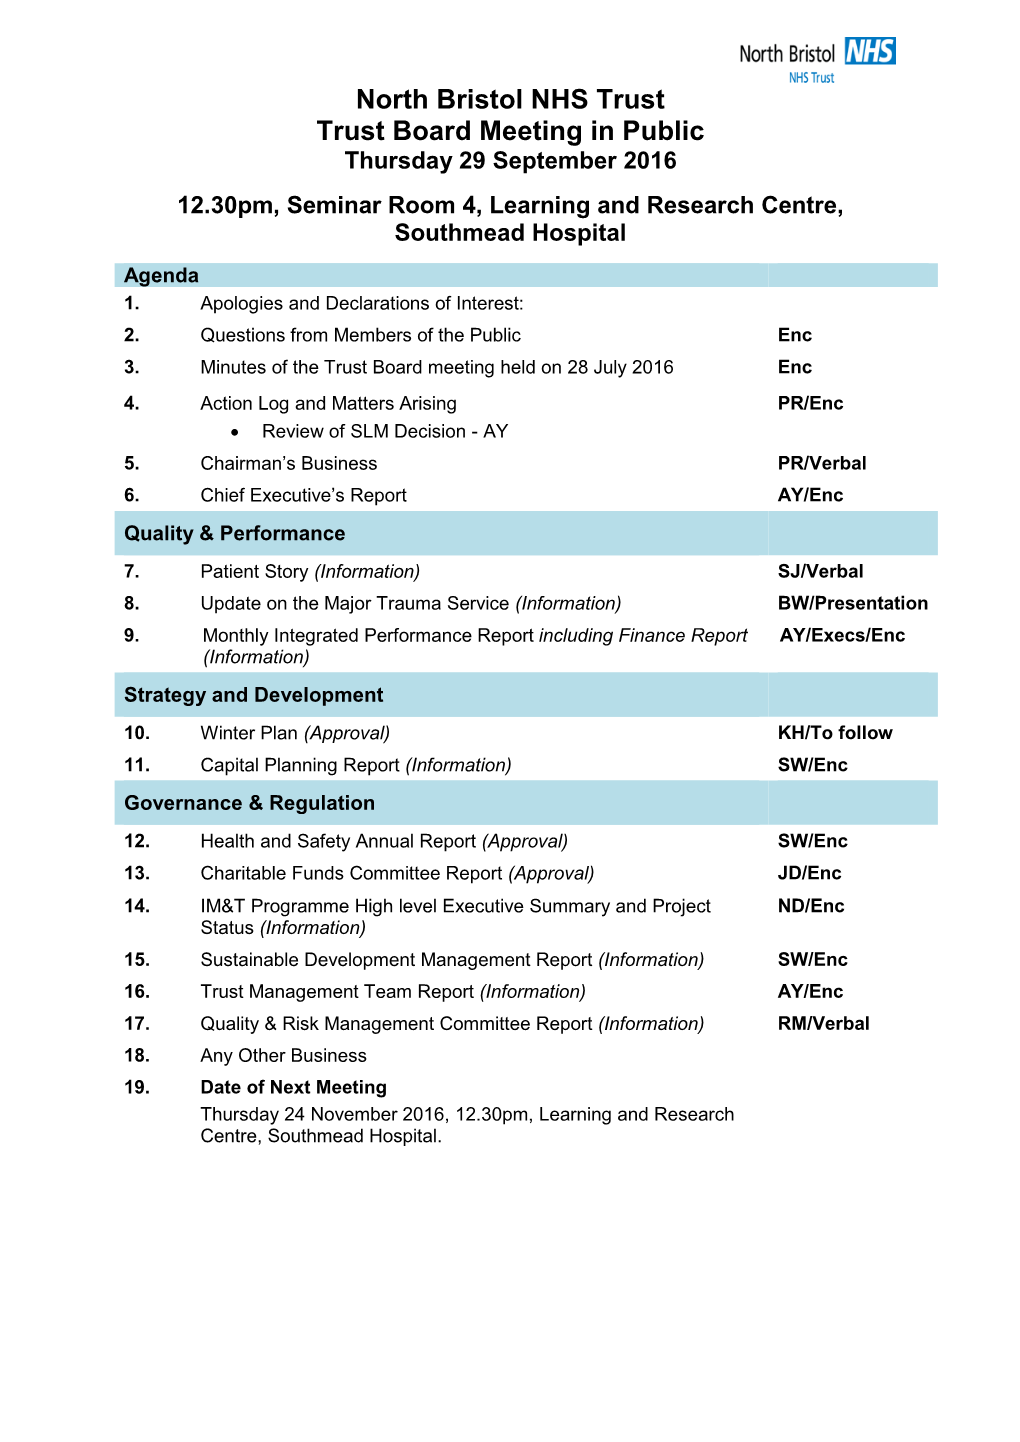 North Bristol NHS Trust Trust Board Meeting in Public Thursday 29 September 2016 12.30Pm, Seminar Room 4, Learning and Research Centre, Southmead Hospital Agenda 1